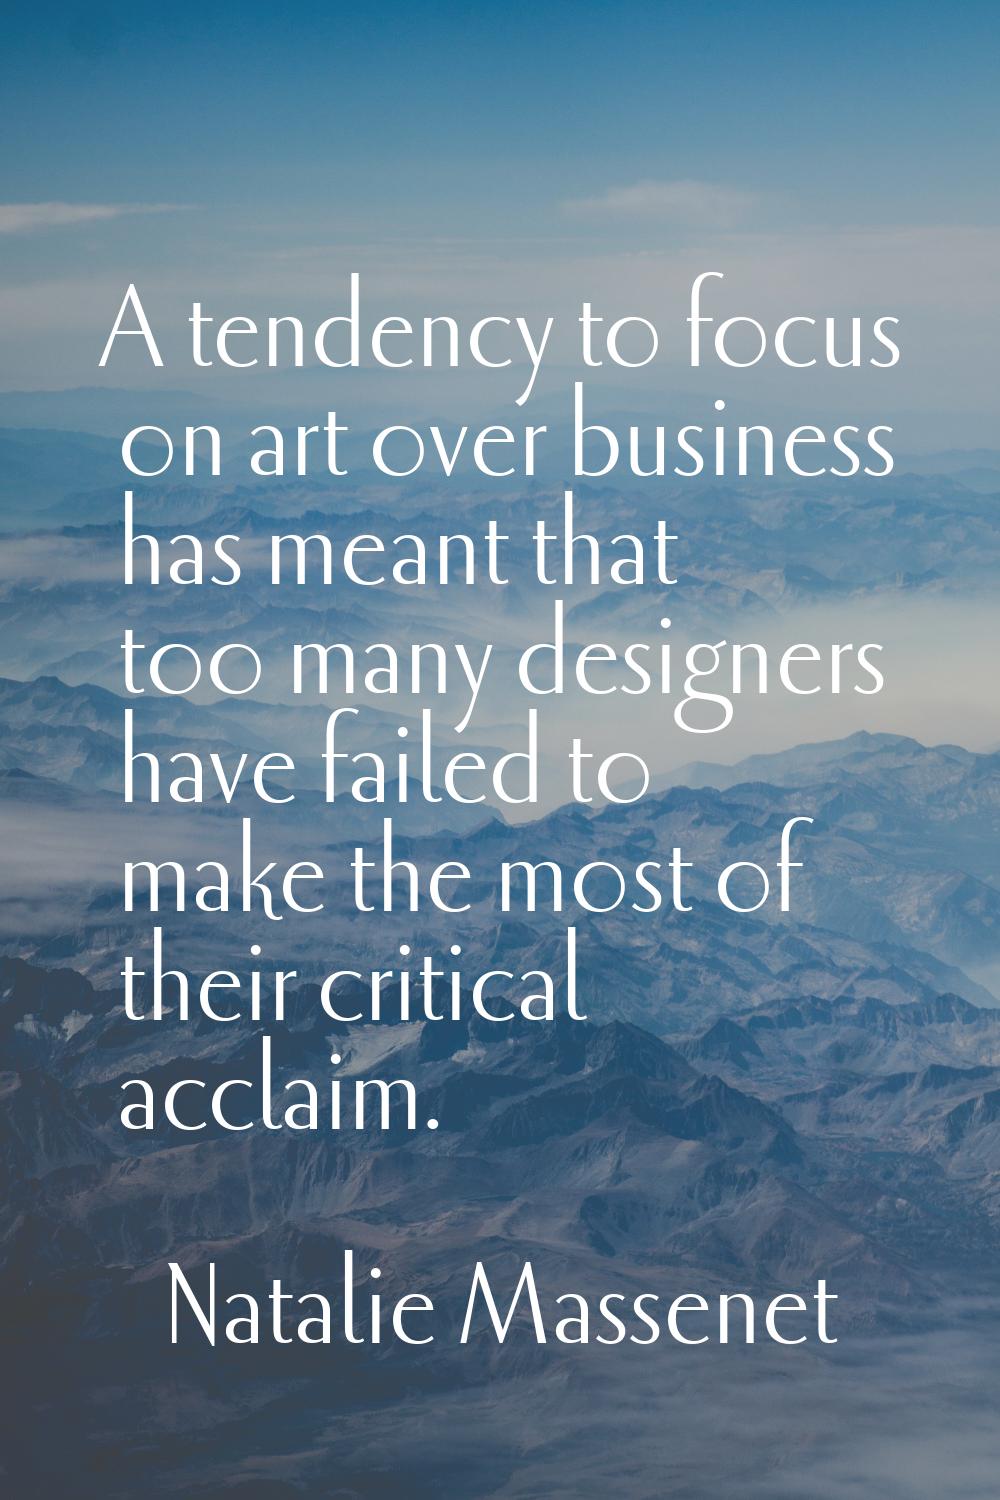 A tendency to focus on art over business has meant that too many designers have failed to make the 